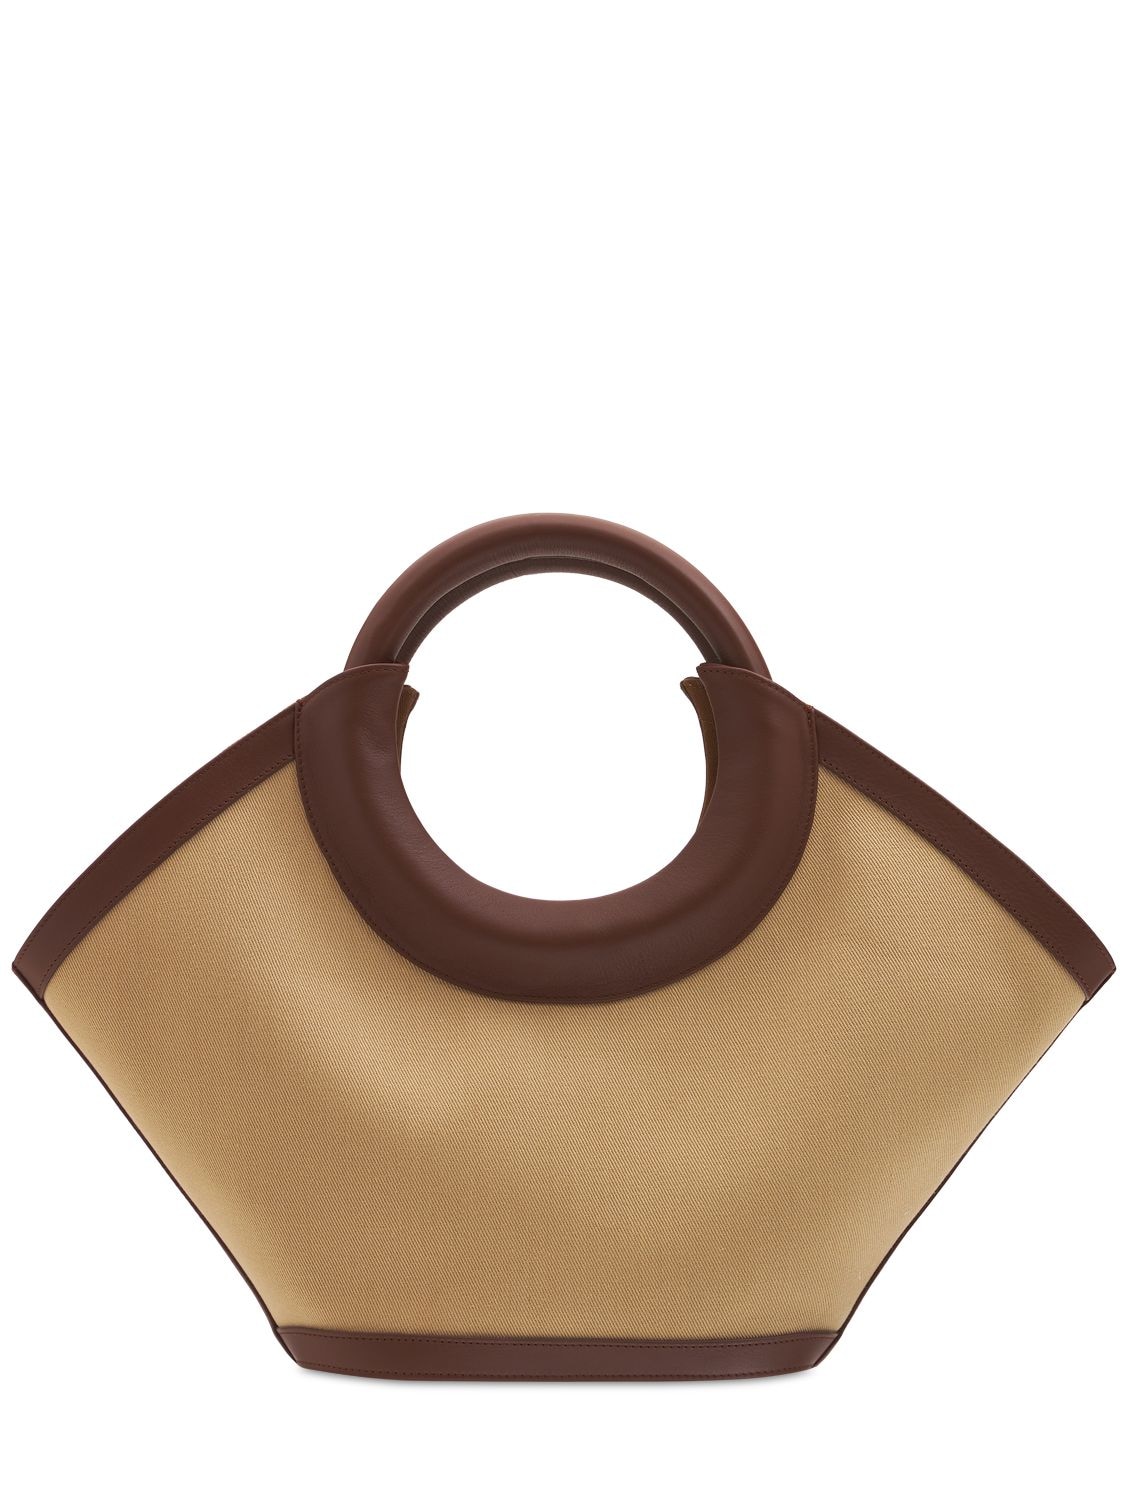 Cabasso Canvas & Leather Tote Bag In Taupe,chestnut